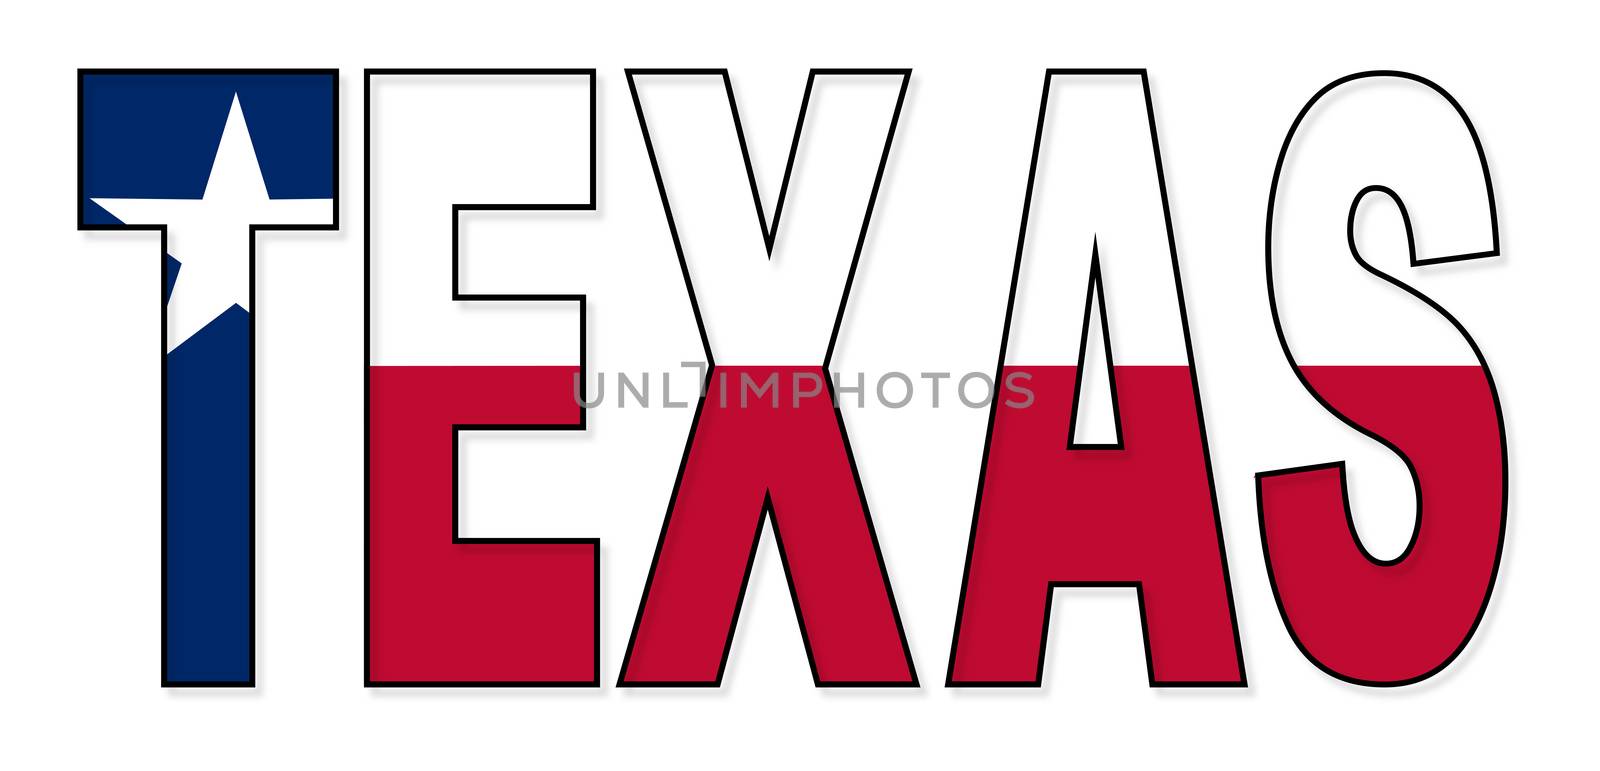 The flag of the USA state of Texas as text